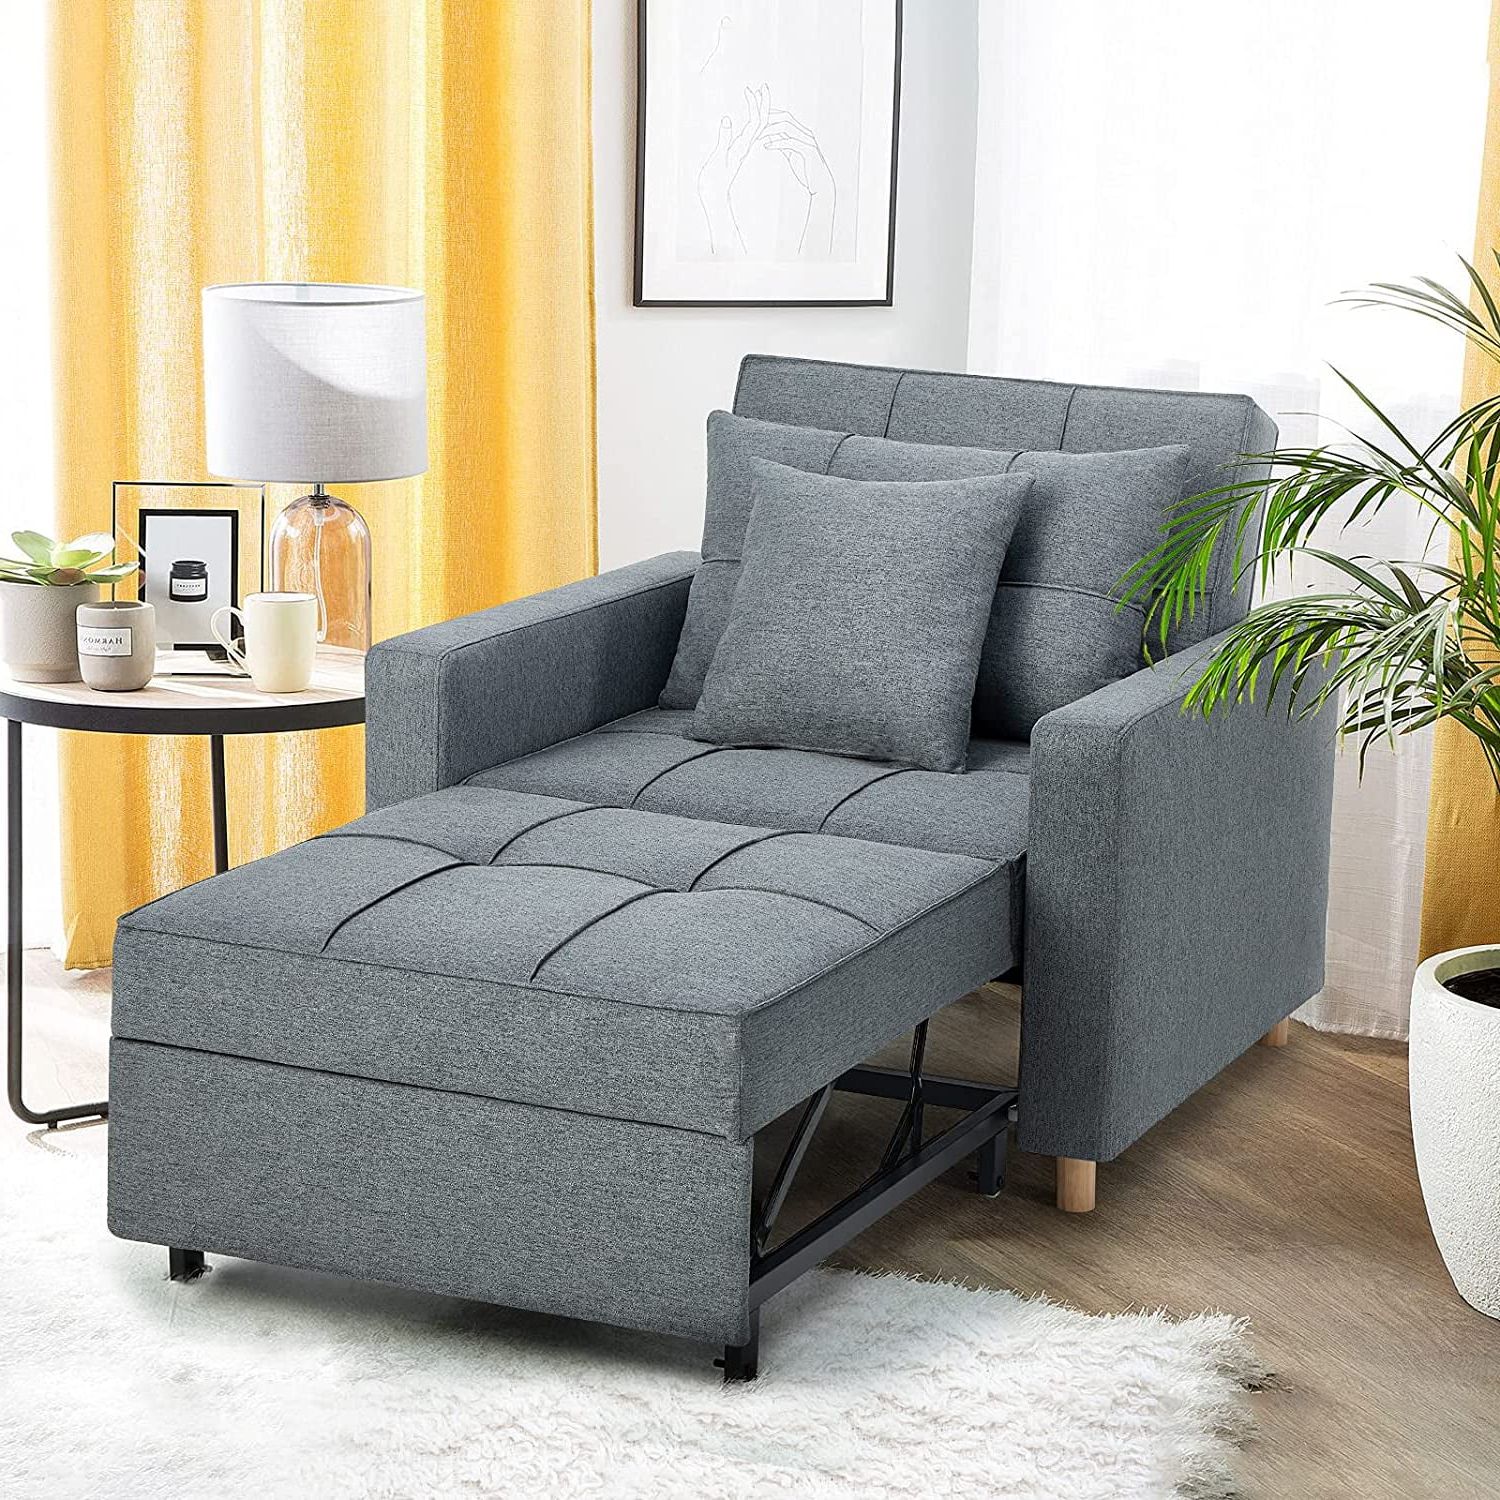 Yodolla 3 In 1 Futon Sofa Bed Chair With Adjustable Backrest Into A With Regard To Convertible Light Gray Chair Beds (View 12 of 20)